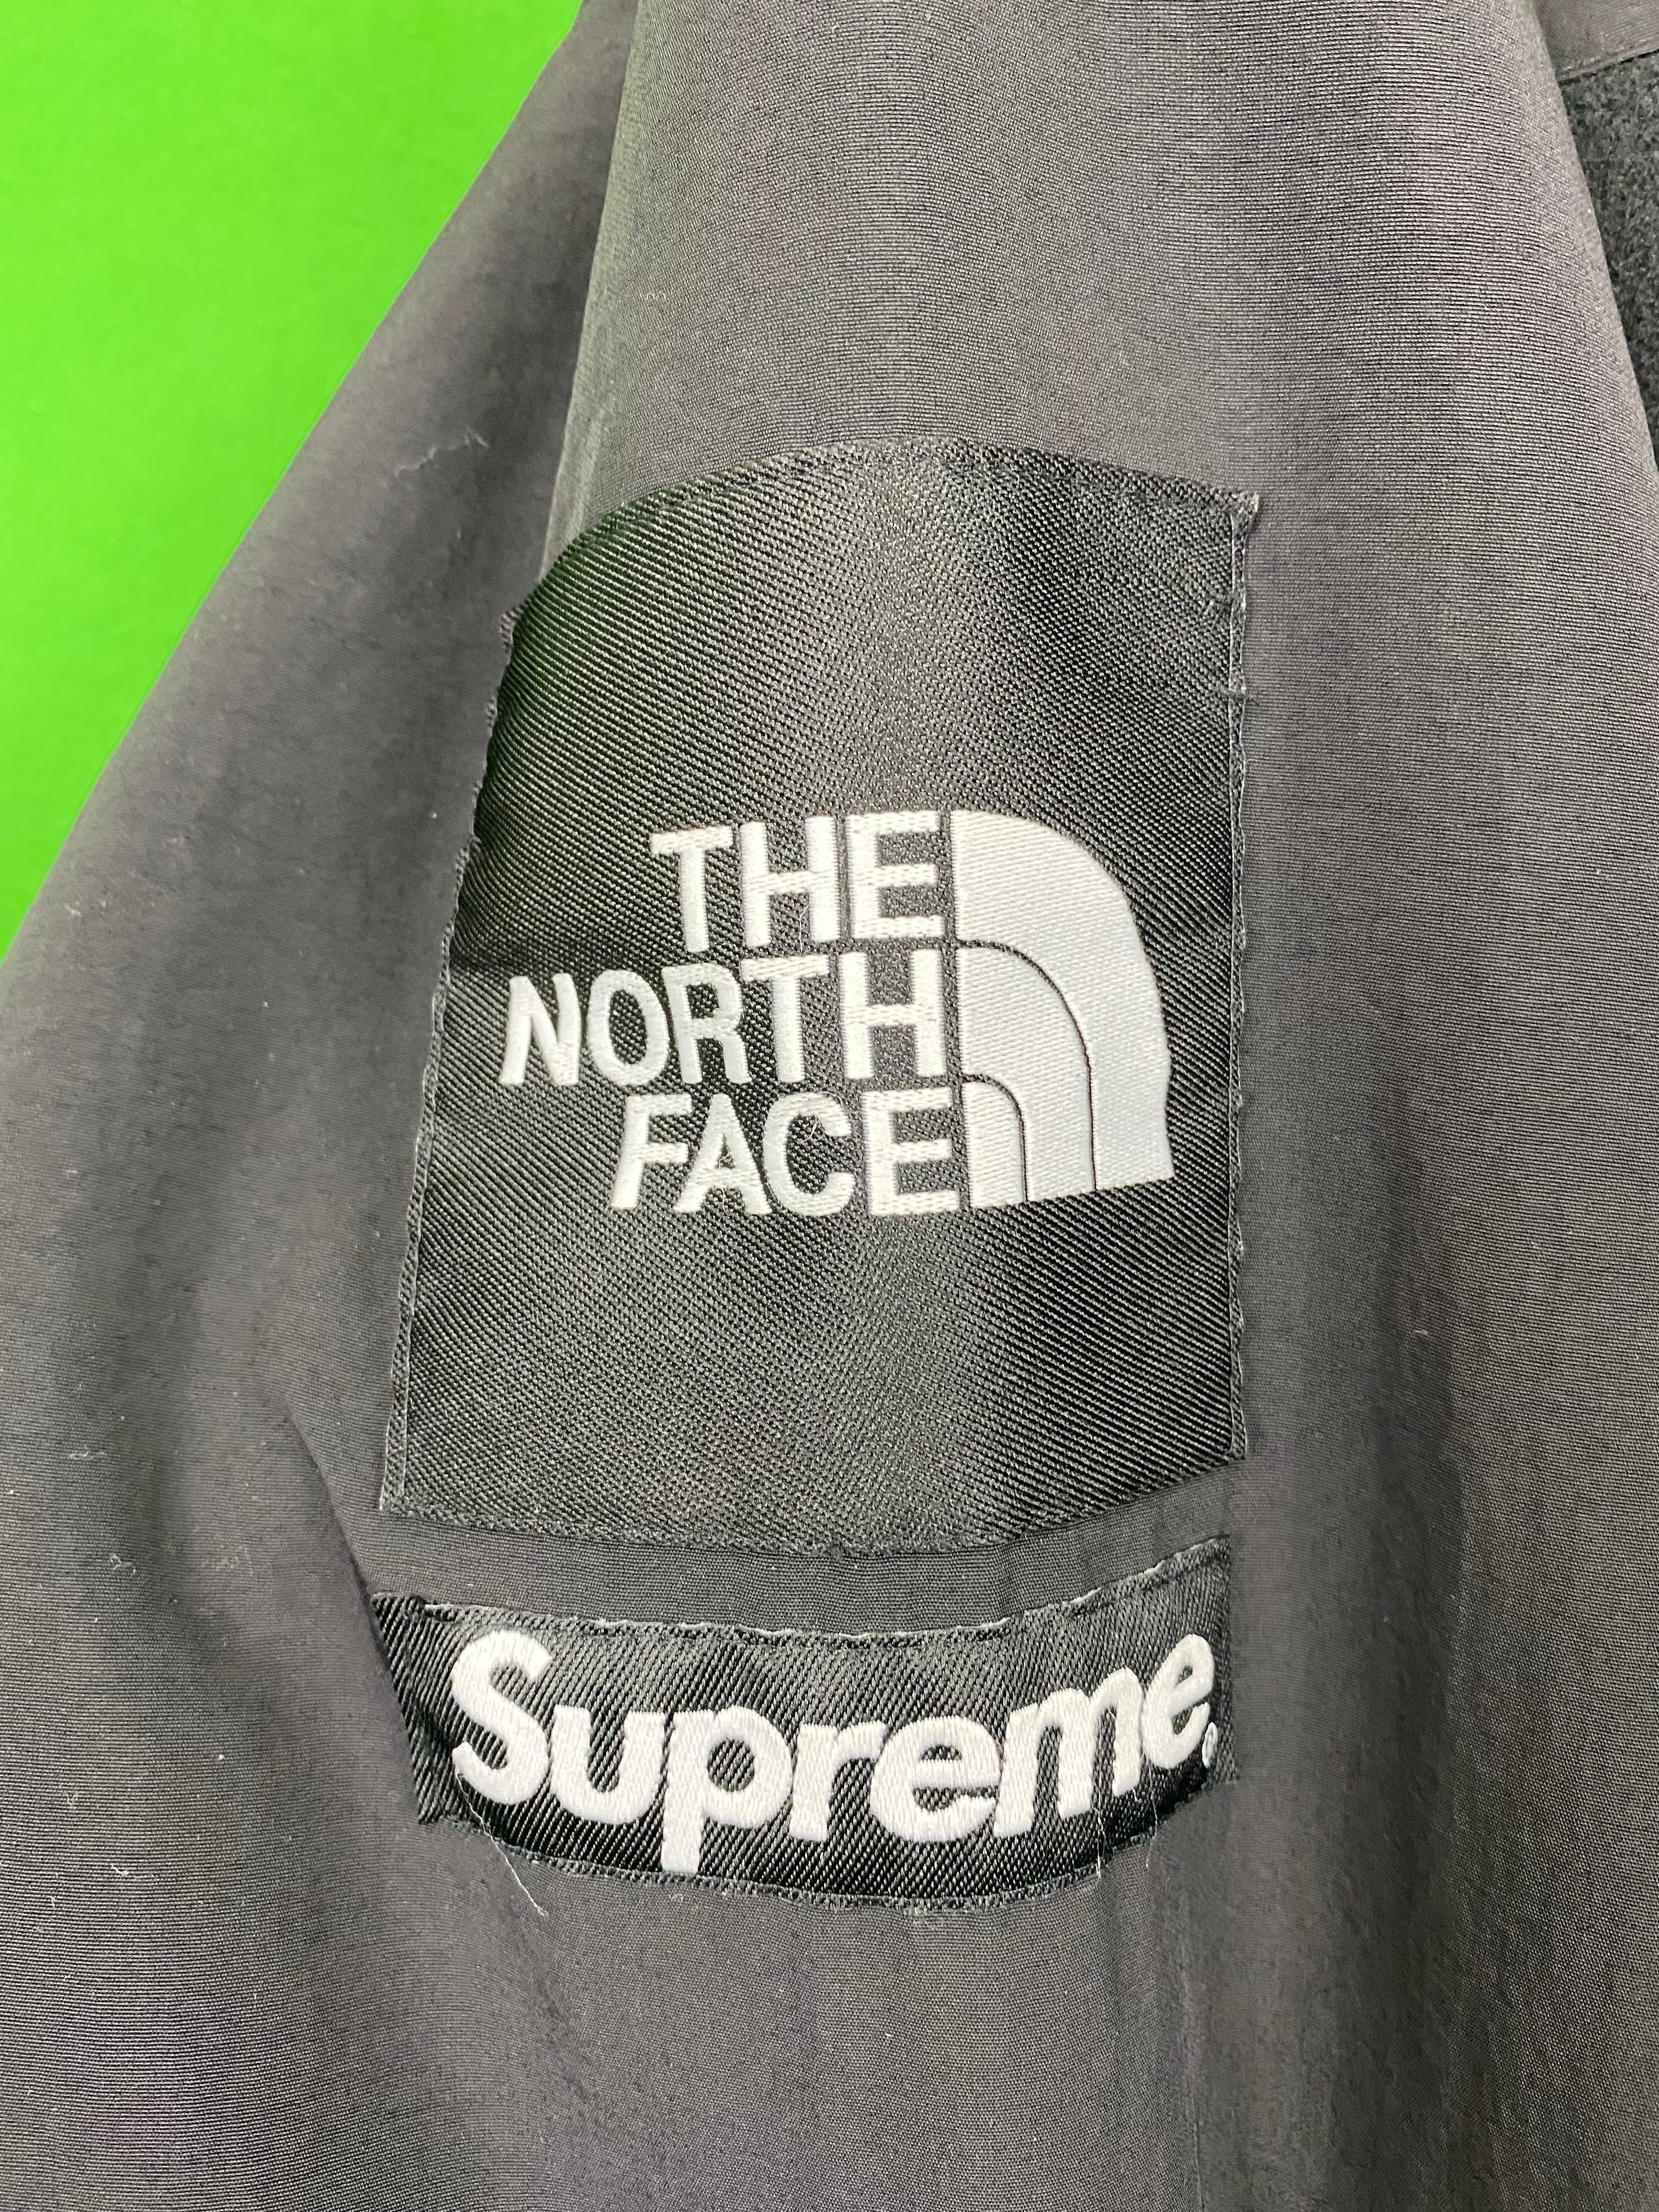 SUPREME × THE NORTH FACE RTG FLEECE JACKET XL | M＆M Select shop powered by  BASE